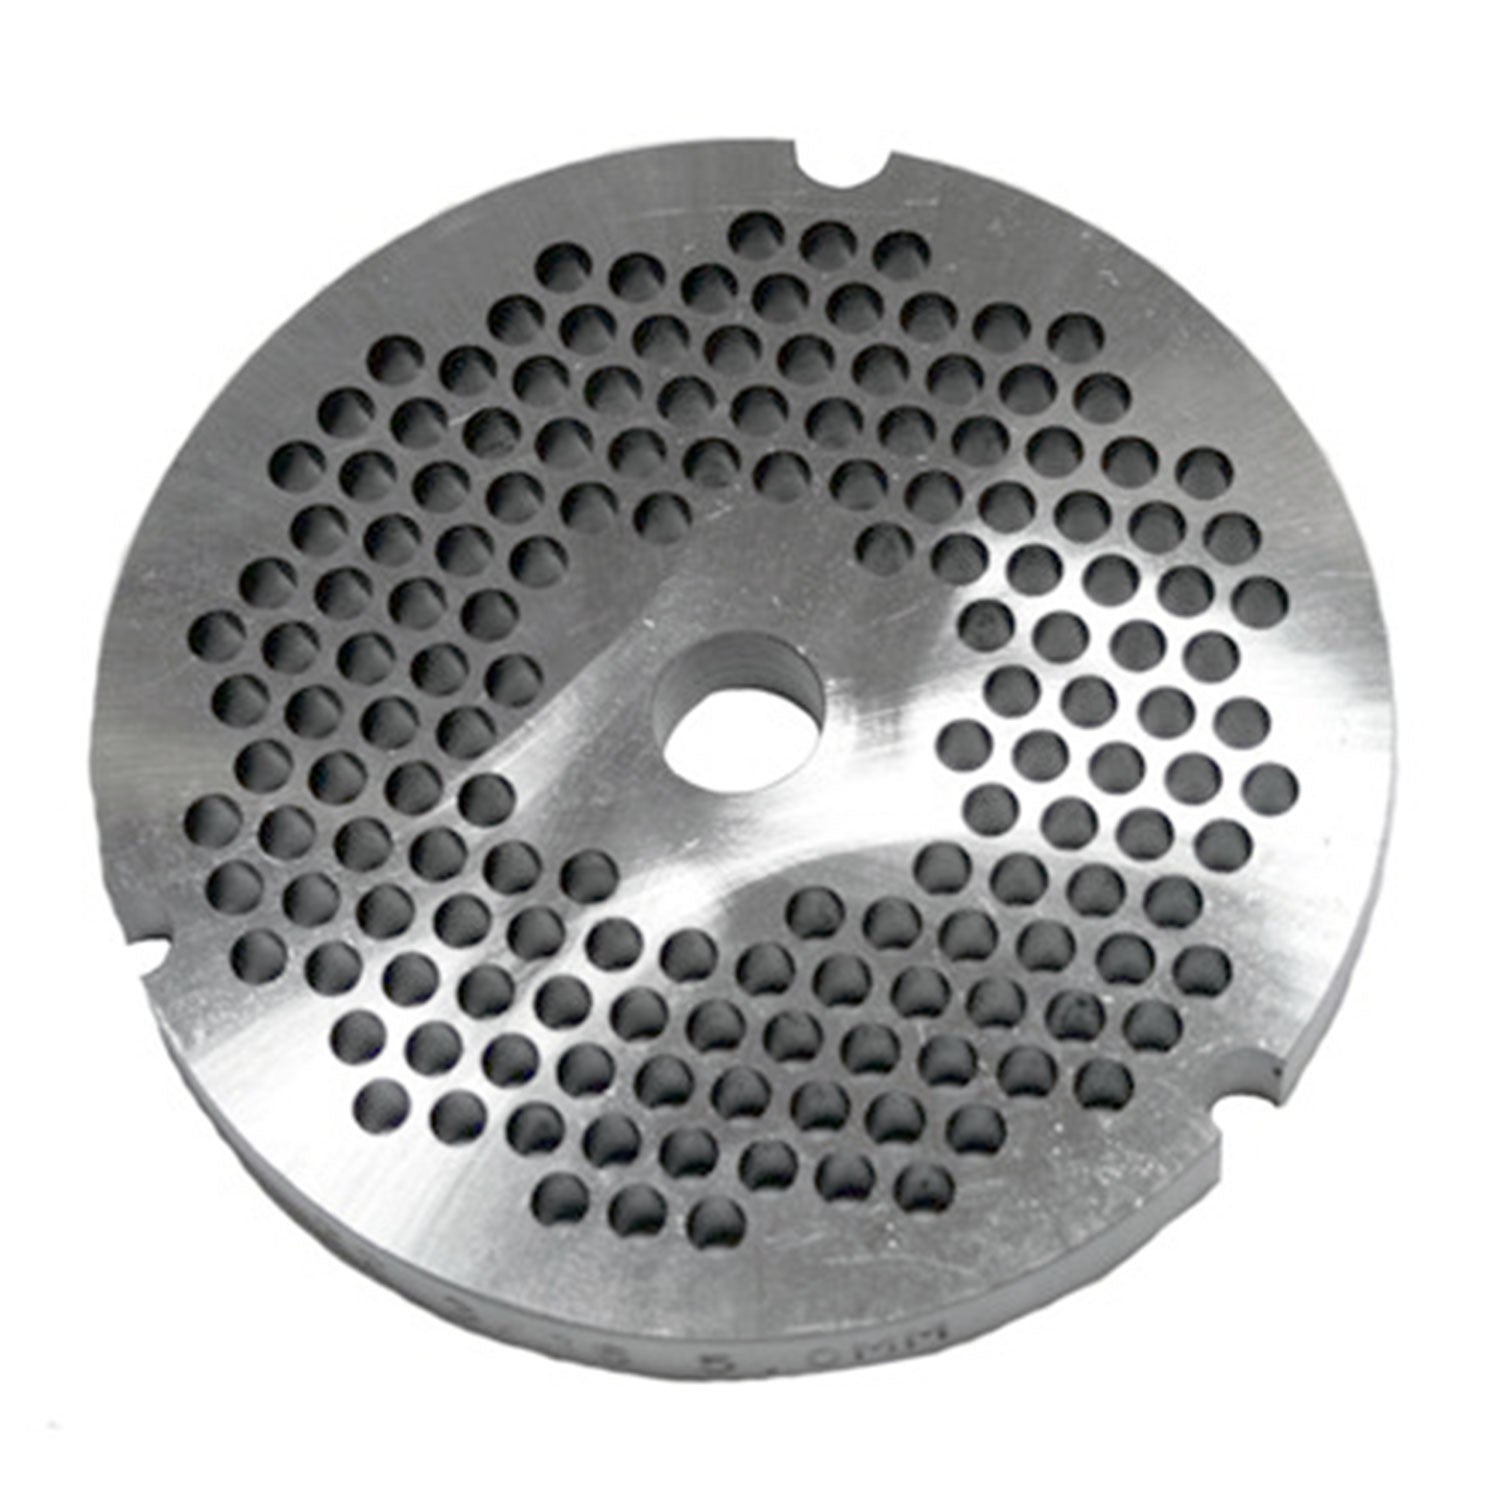 Size 32 DC Reversible Meat Grinder Plate, 3/16